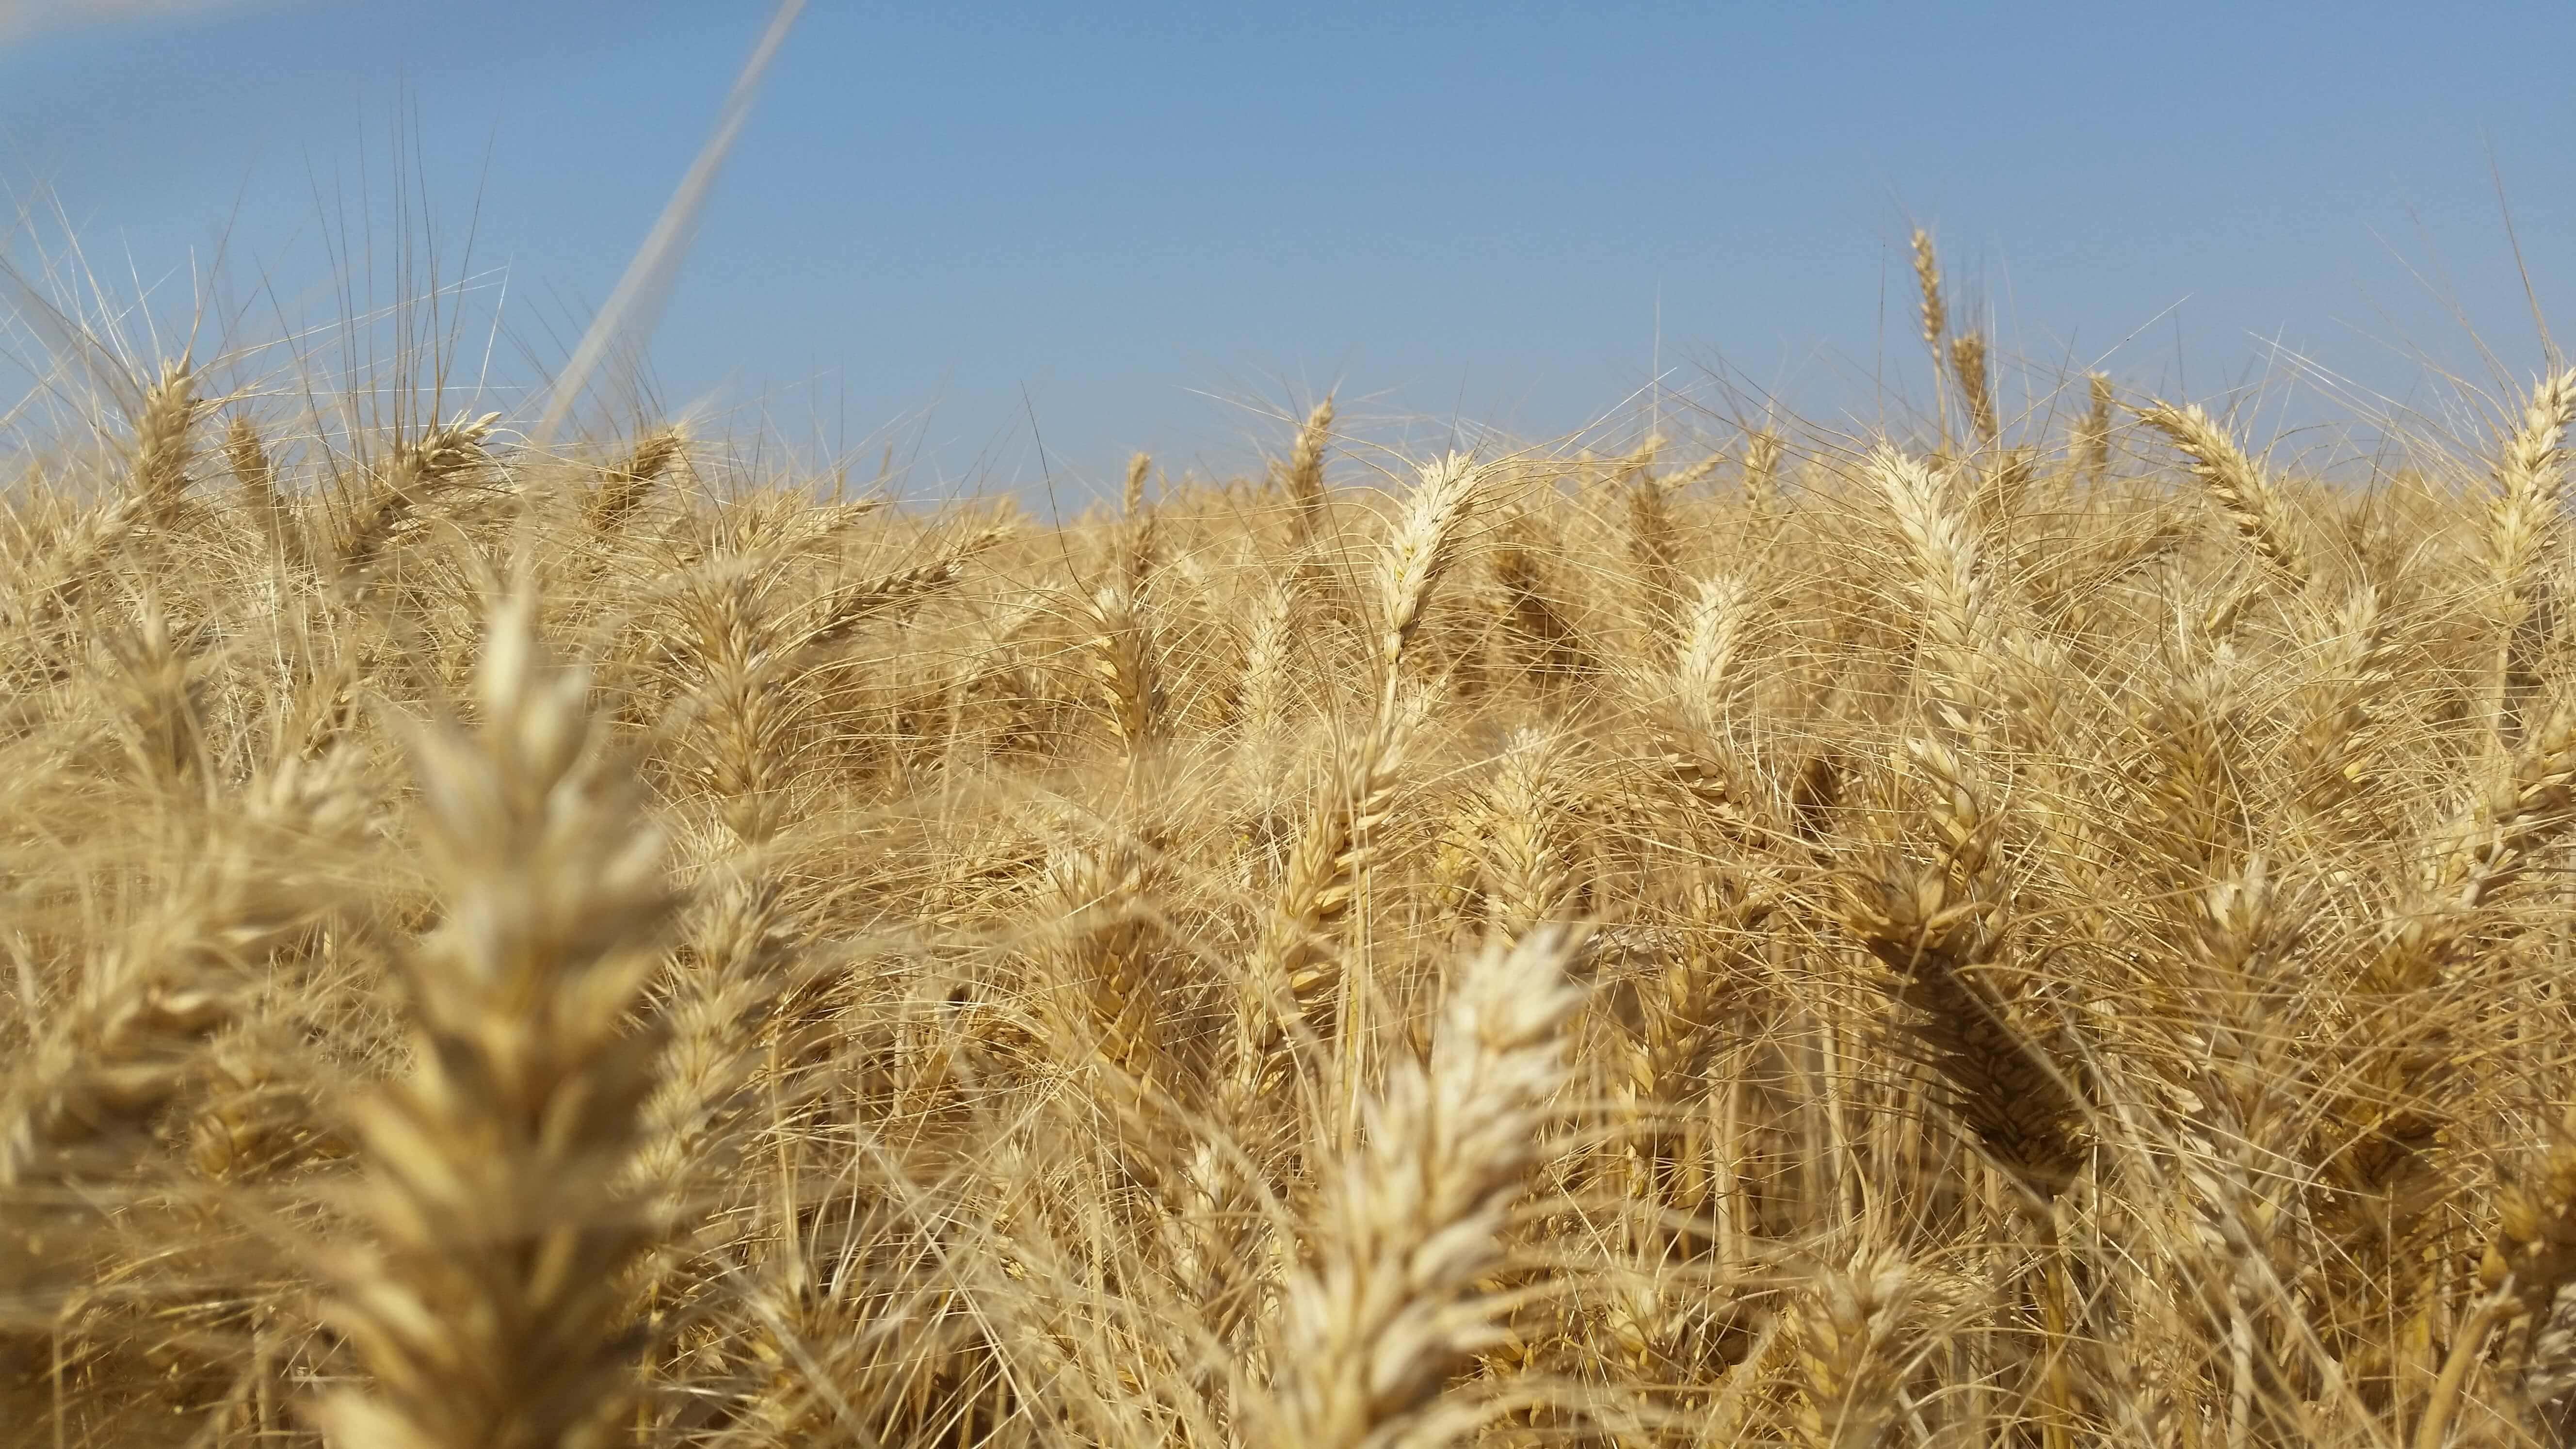 Golden wheat crops are pictured with a blue sky in the background